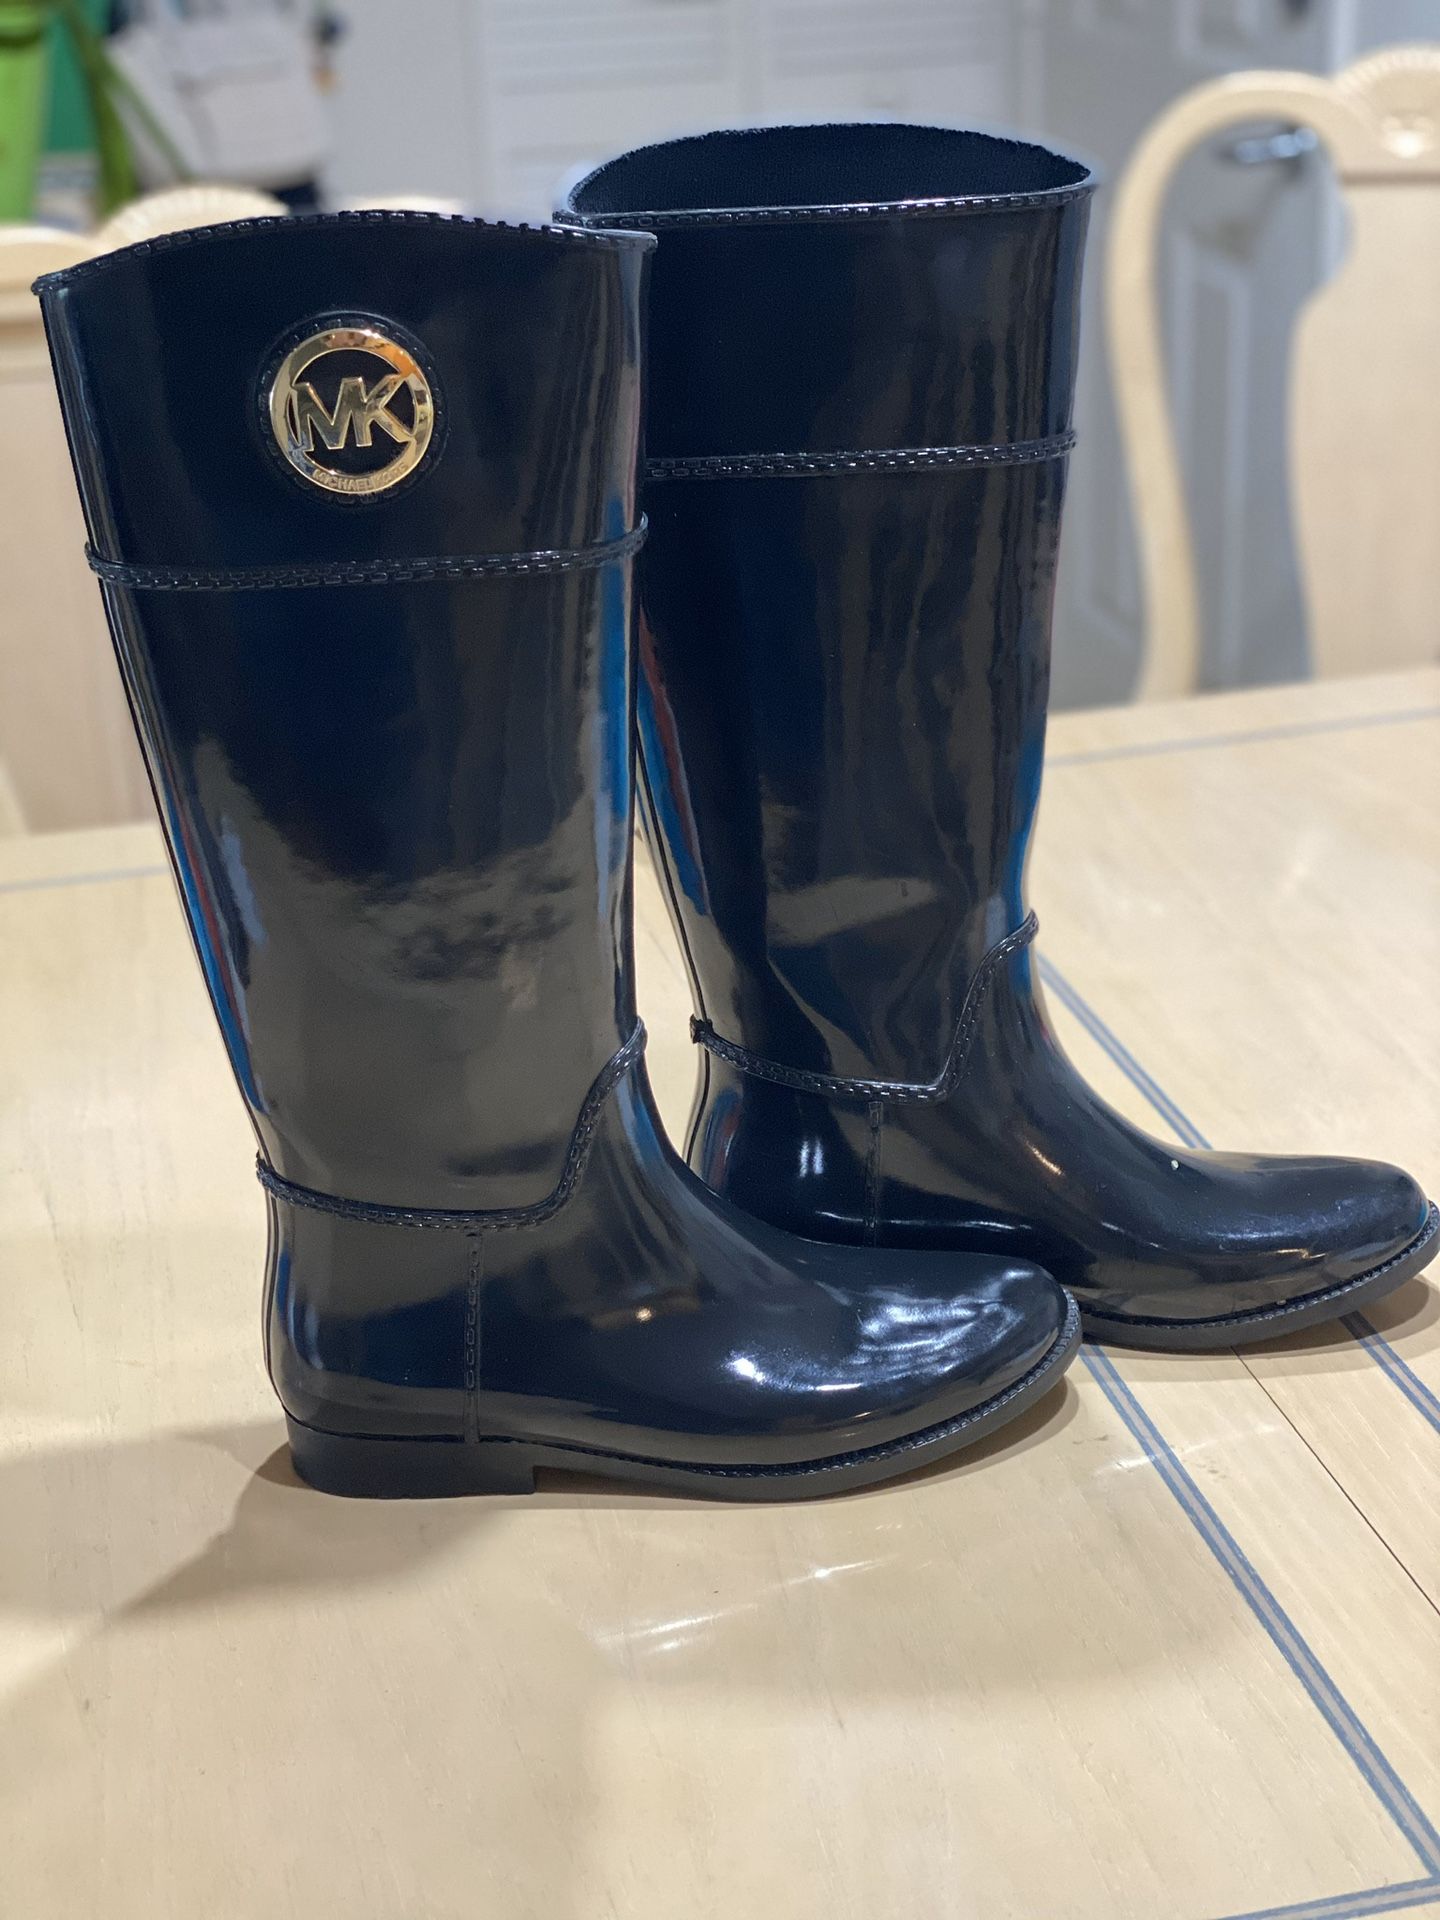 Rain Boots Michael Kors - New (Never used) Size 10 W